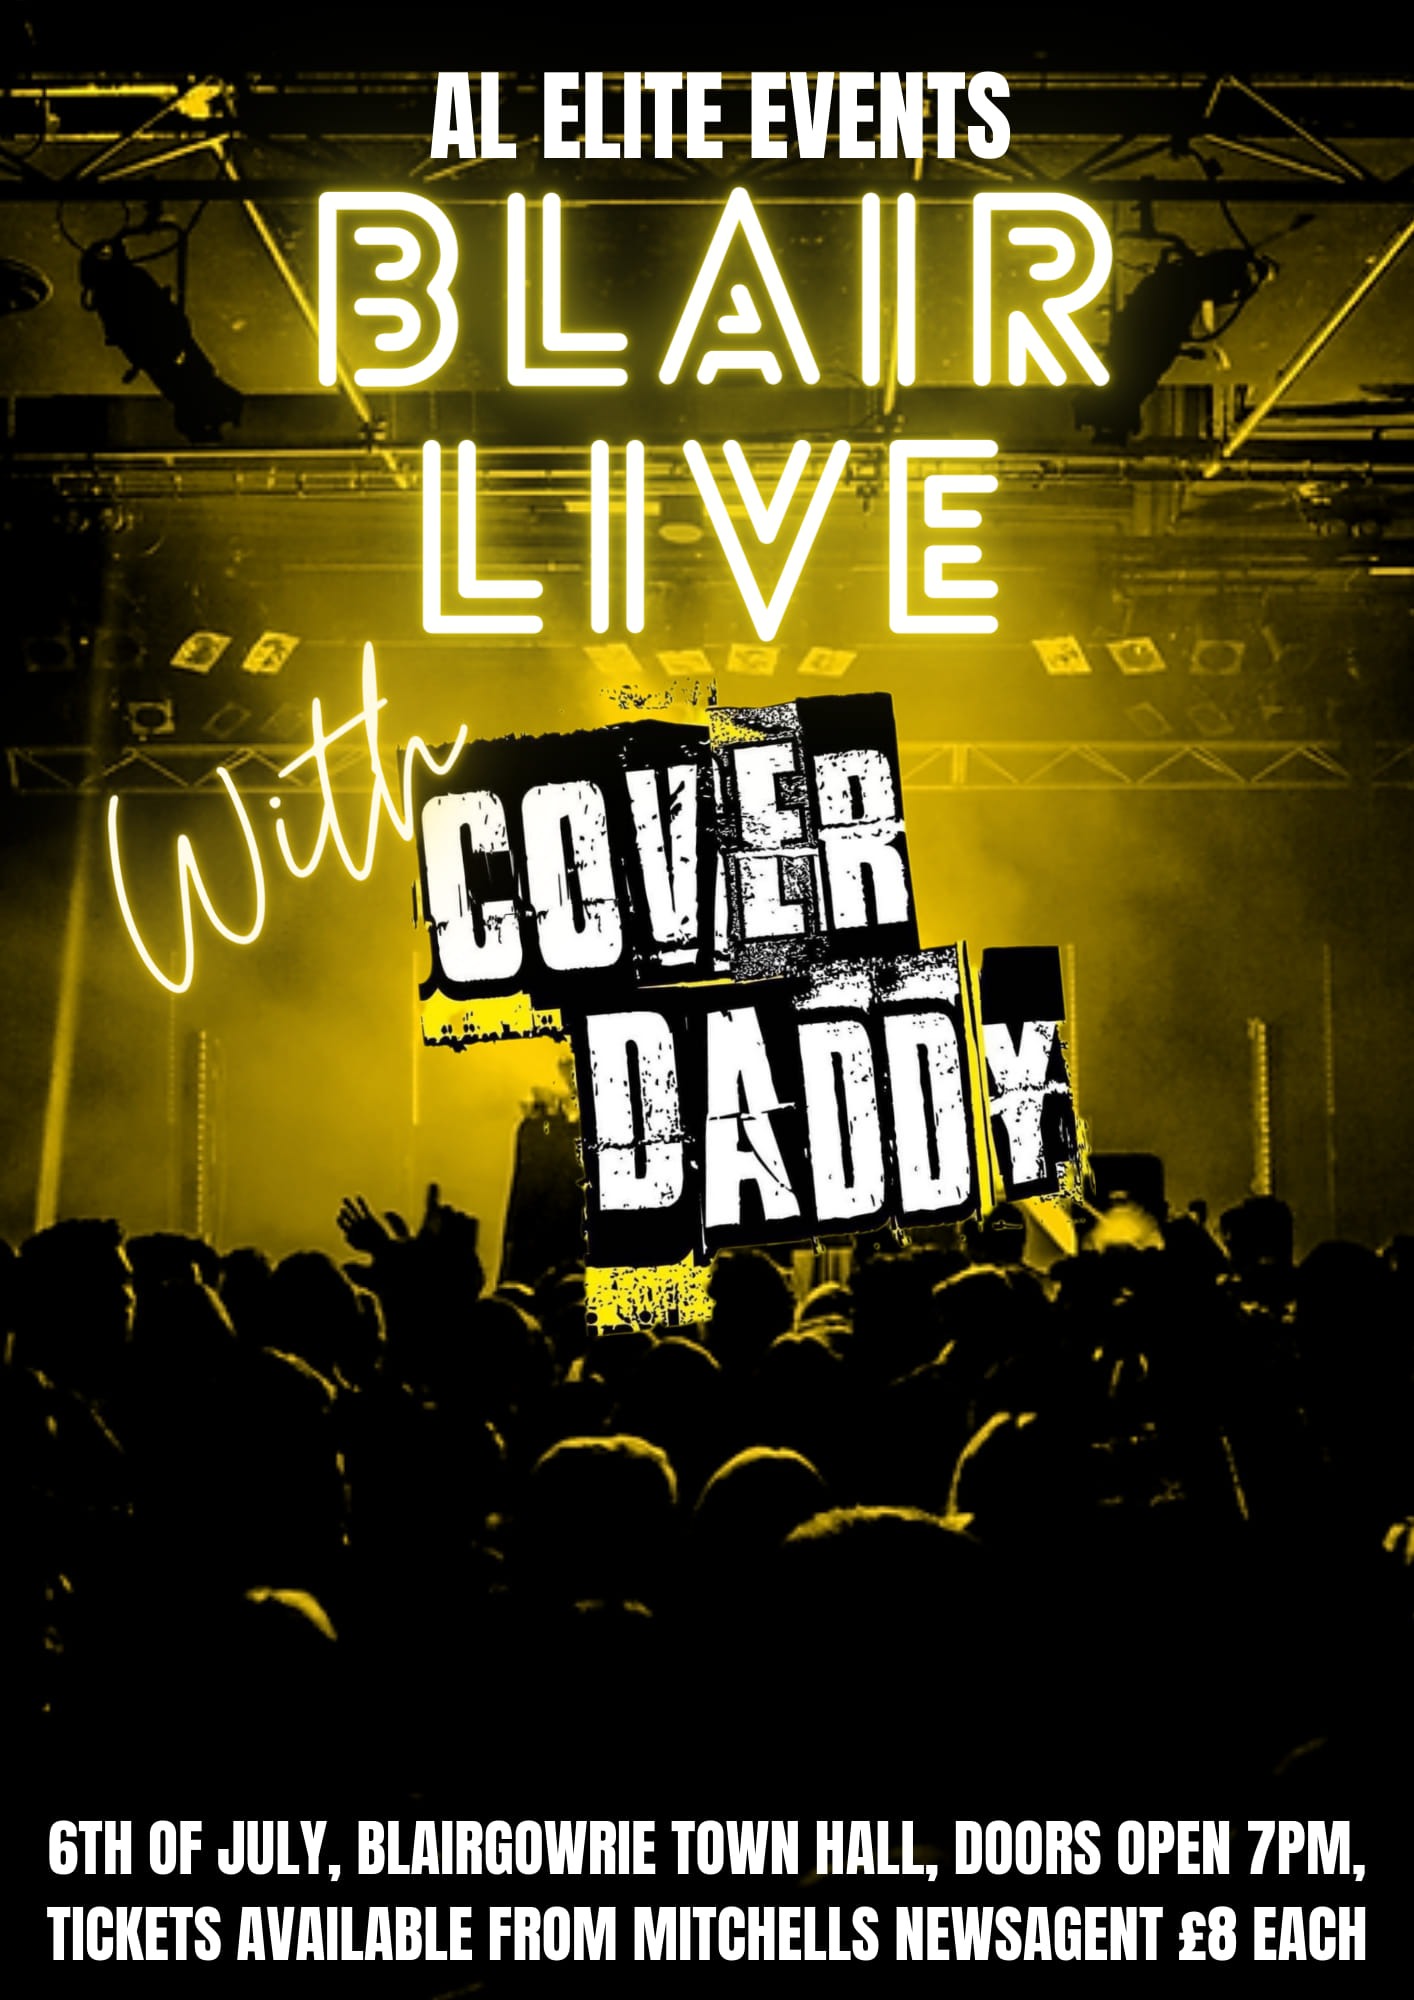 Blair Live with Cover Daddy 